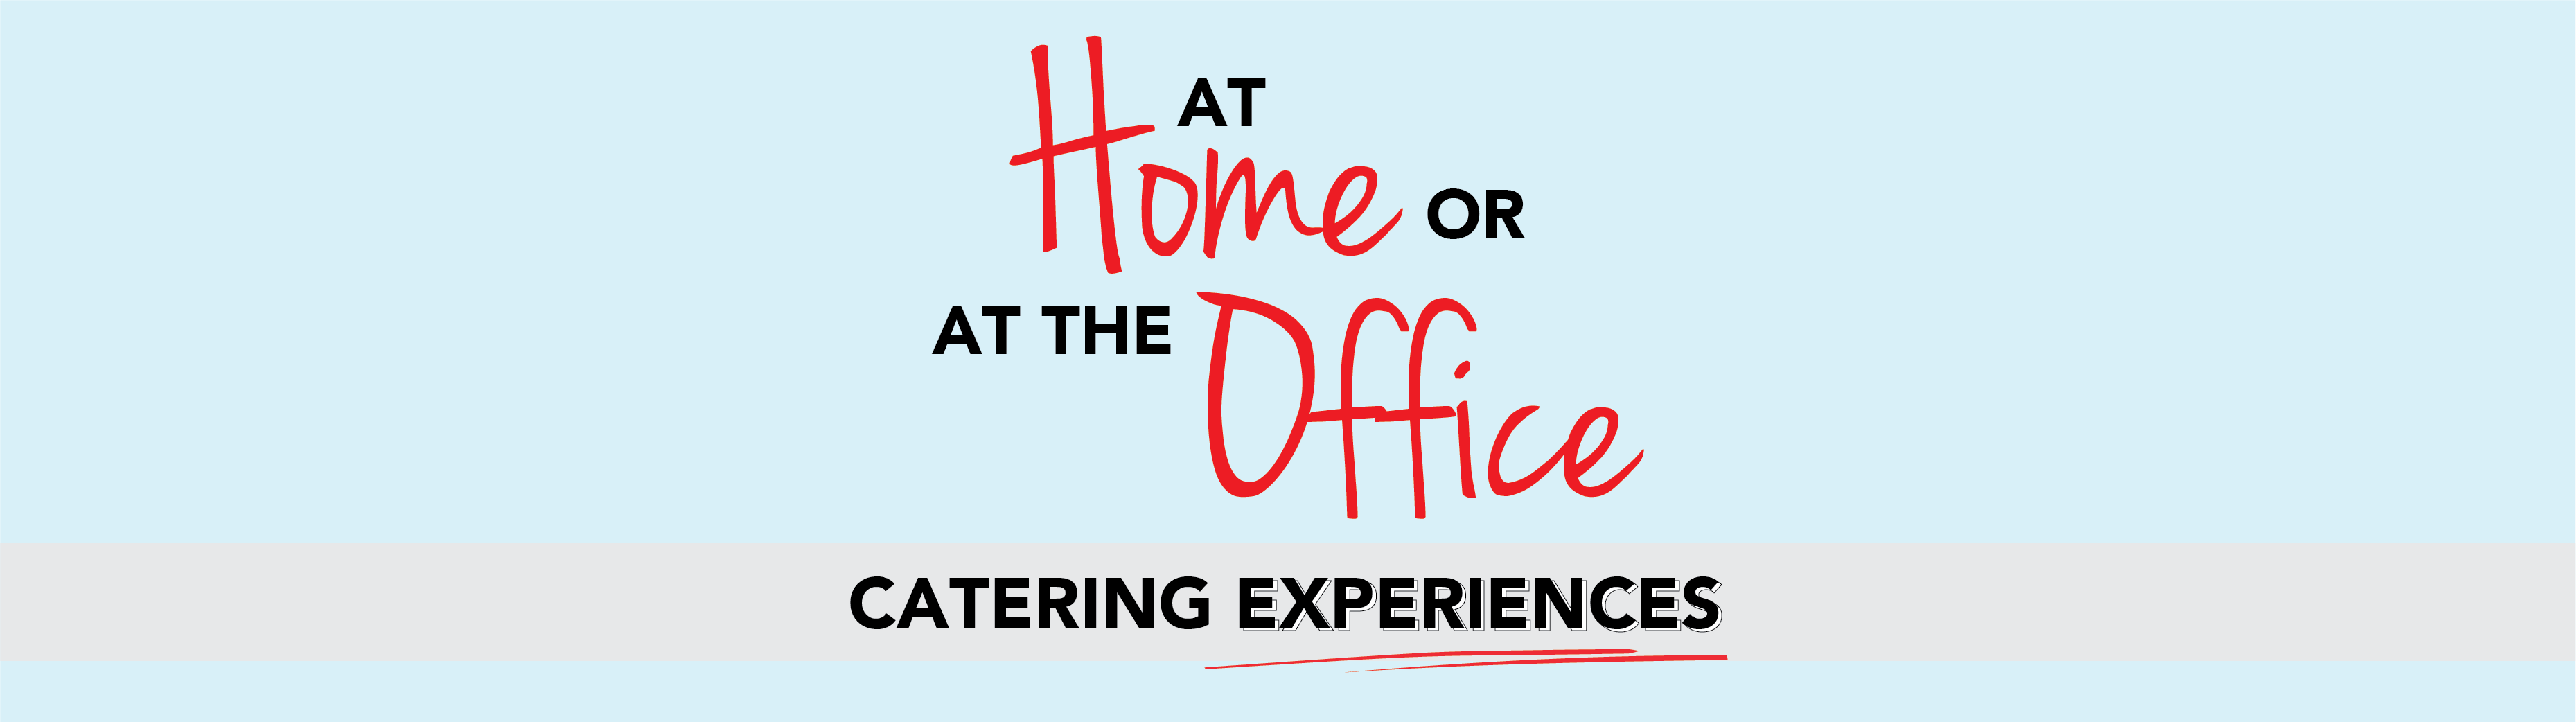 At Home or Office Catering Experiences